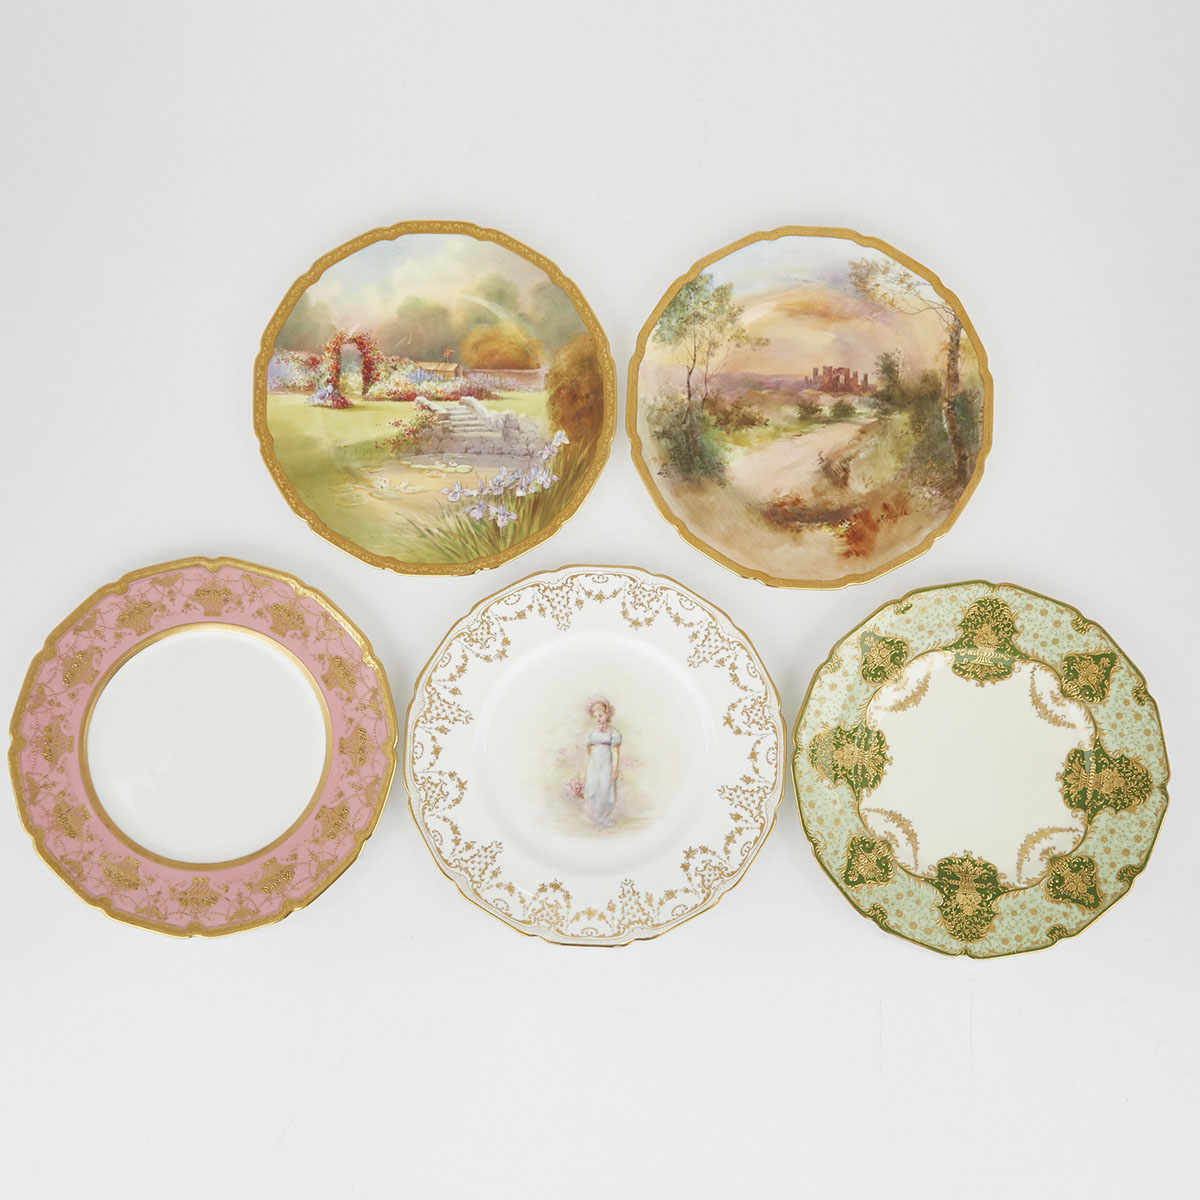 Five Royal Doulton Plates, early 20th century